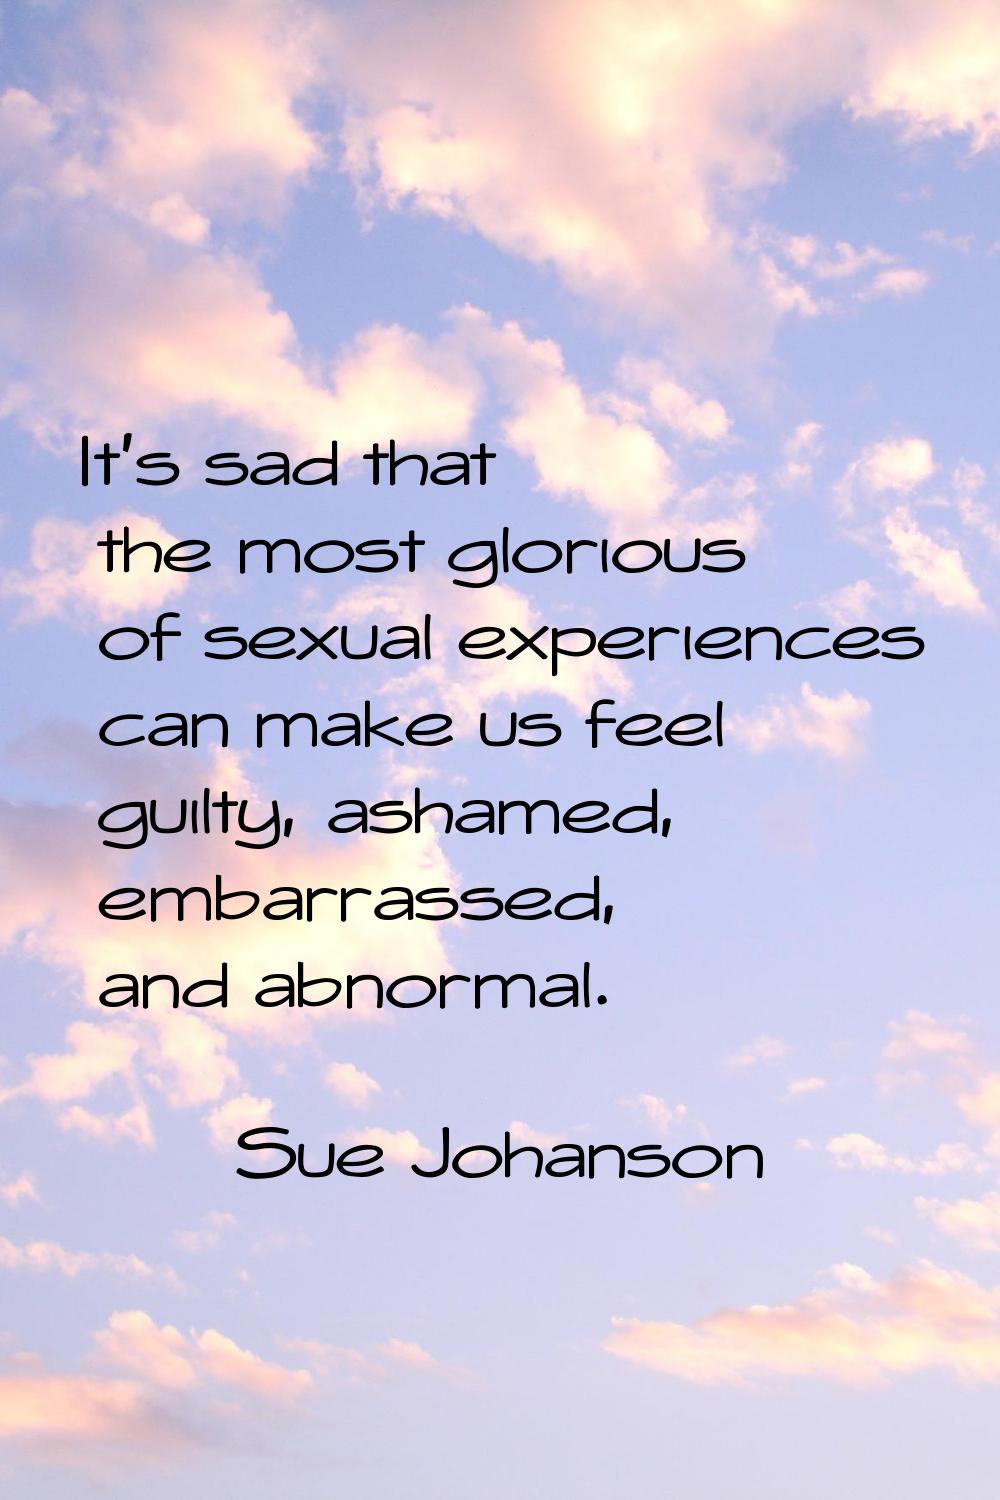 It's sad that the most glorious of sexual experiences can make us feel guilty, ashamed, embarrassed